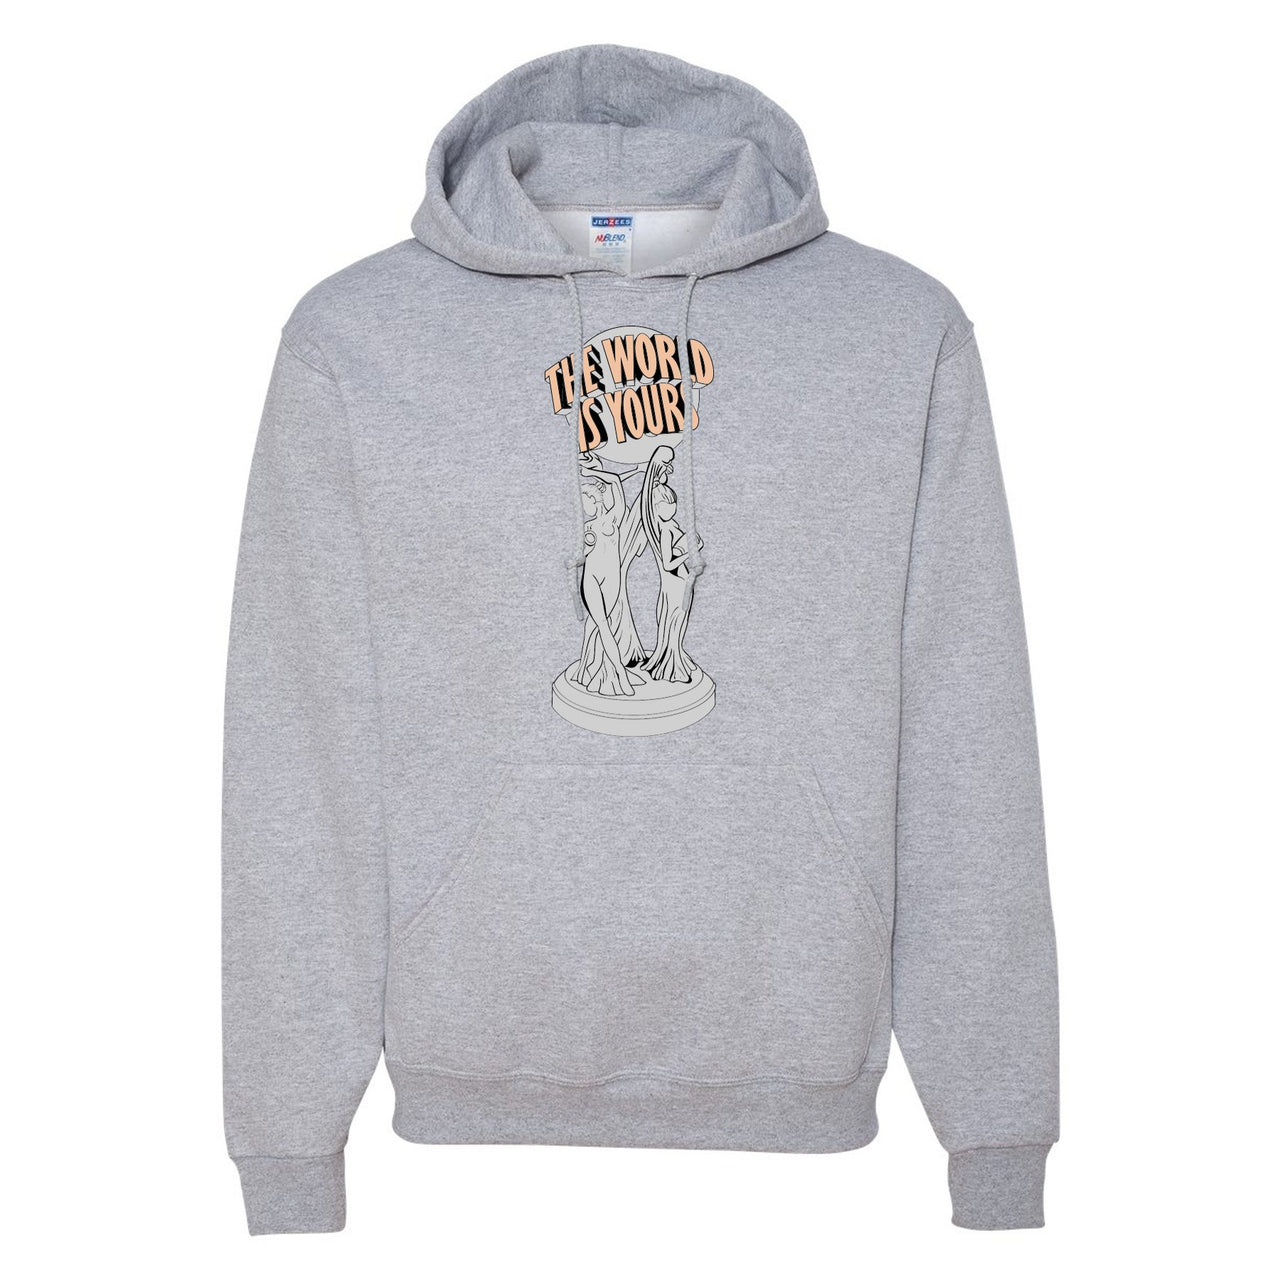 True Form v2 350s Hoodie | The World Is Yours, Heathered Light Gray